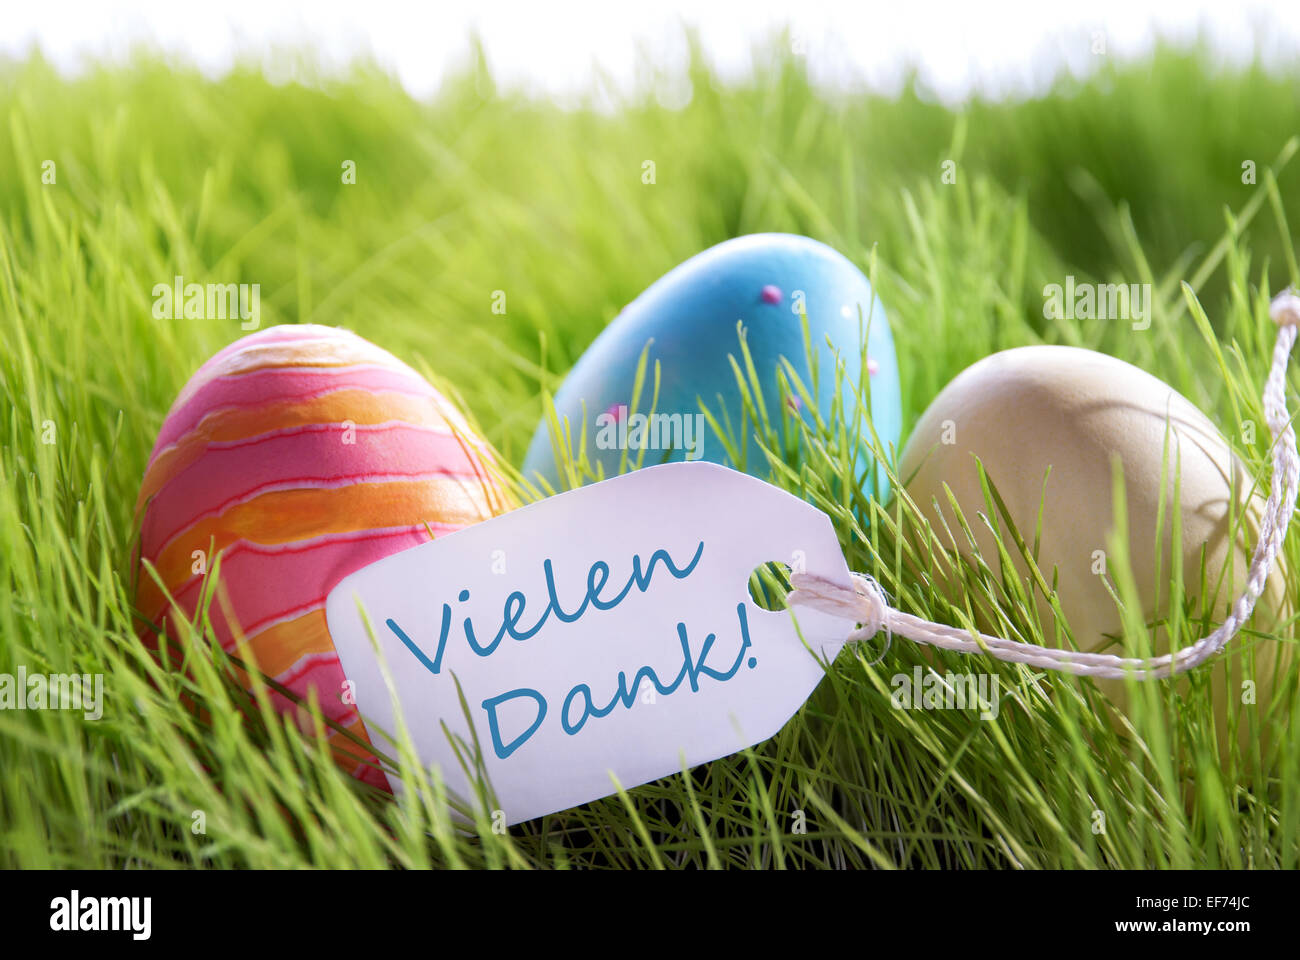 Colorful Easter Background With Three Easter Eggs And Label With German Text Vielen Dank On Green Grass For Happy Easter Seasons Stock Photo